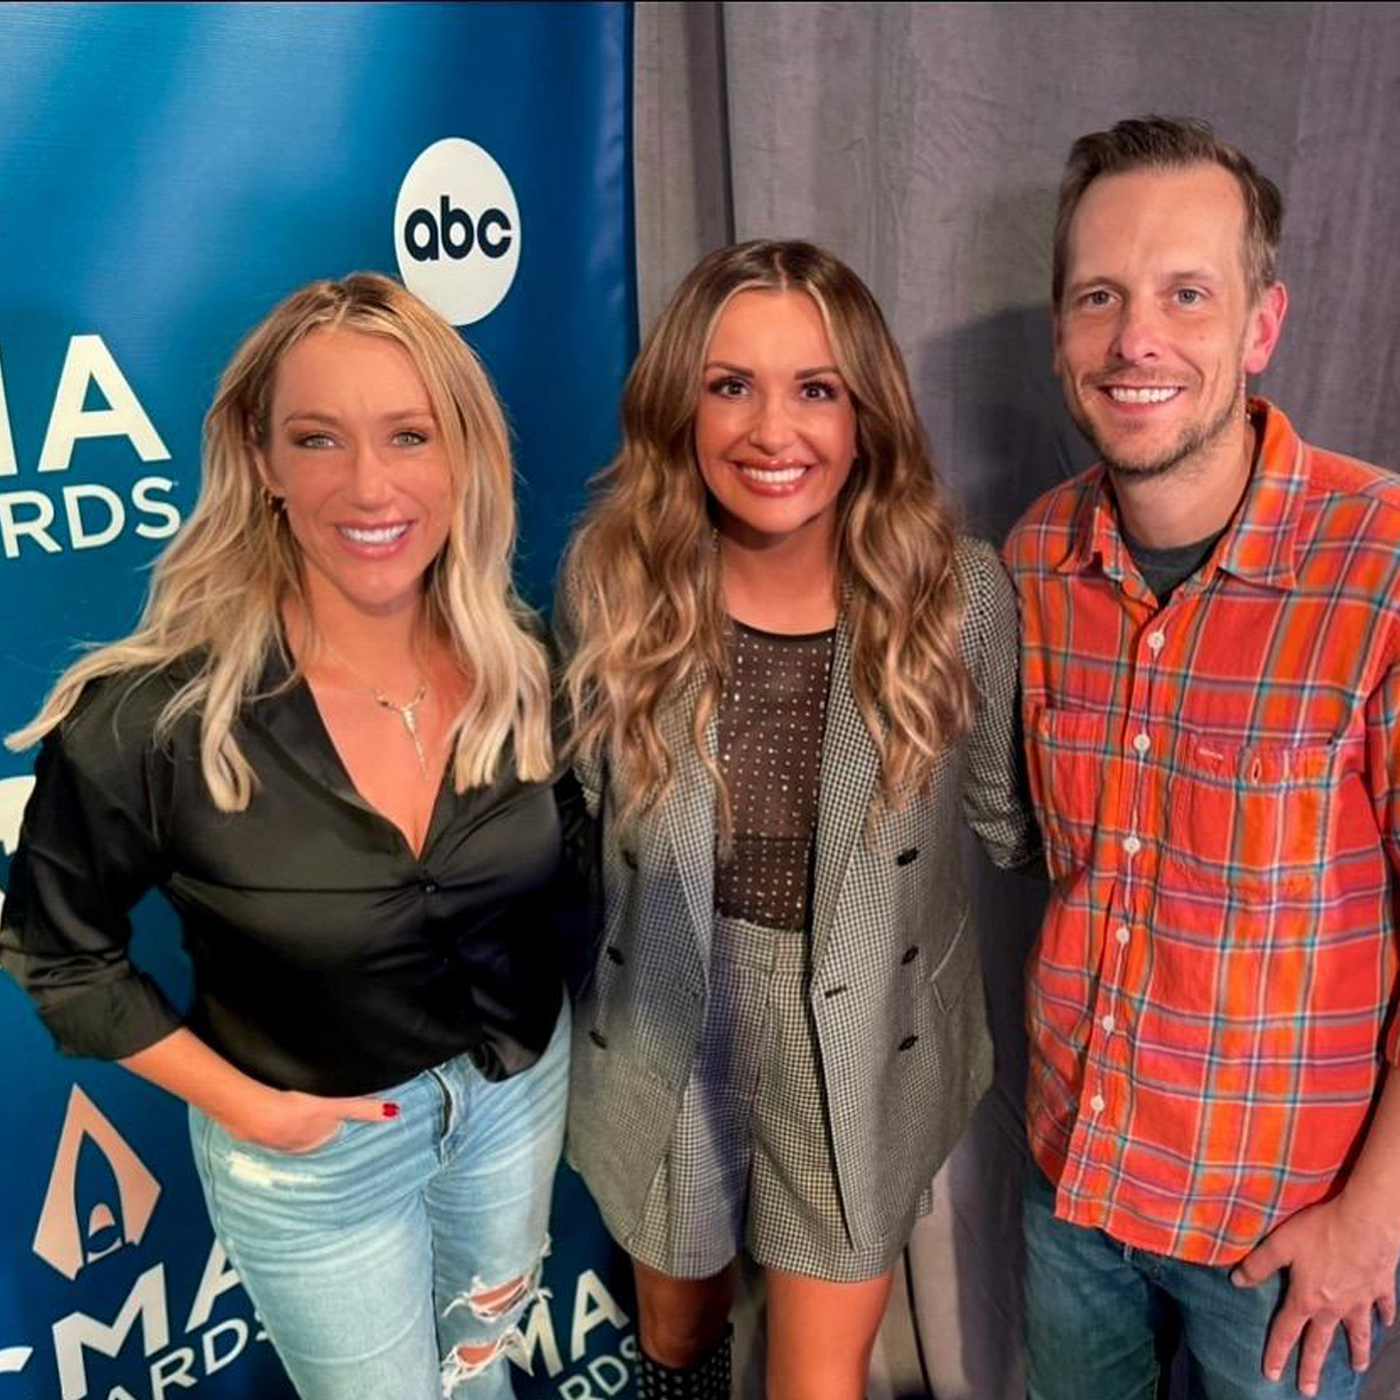 Carly Pearce called in to talk about performing with Tim McGraw this week, her new album and more!